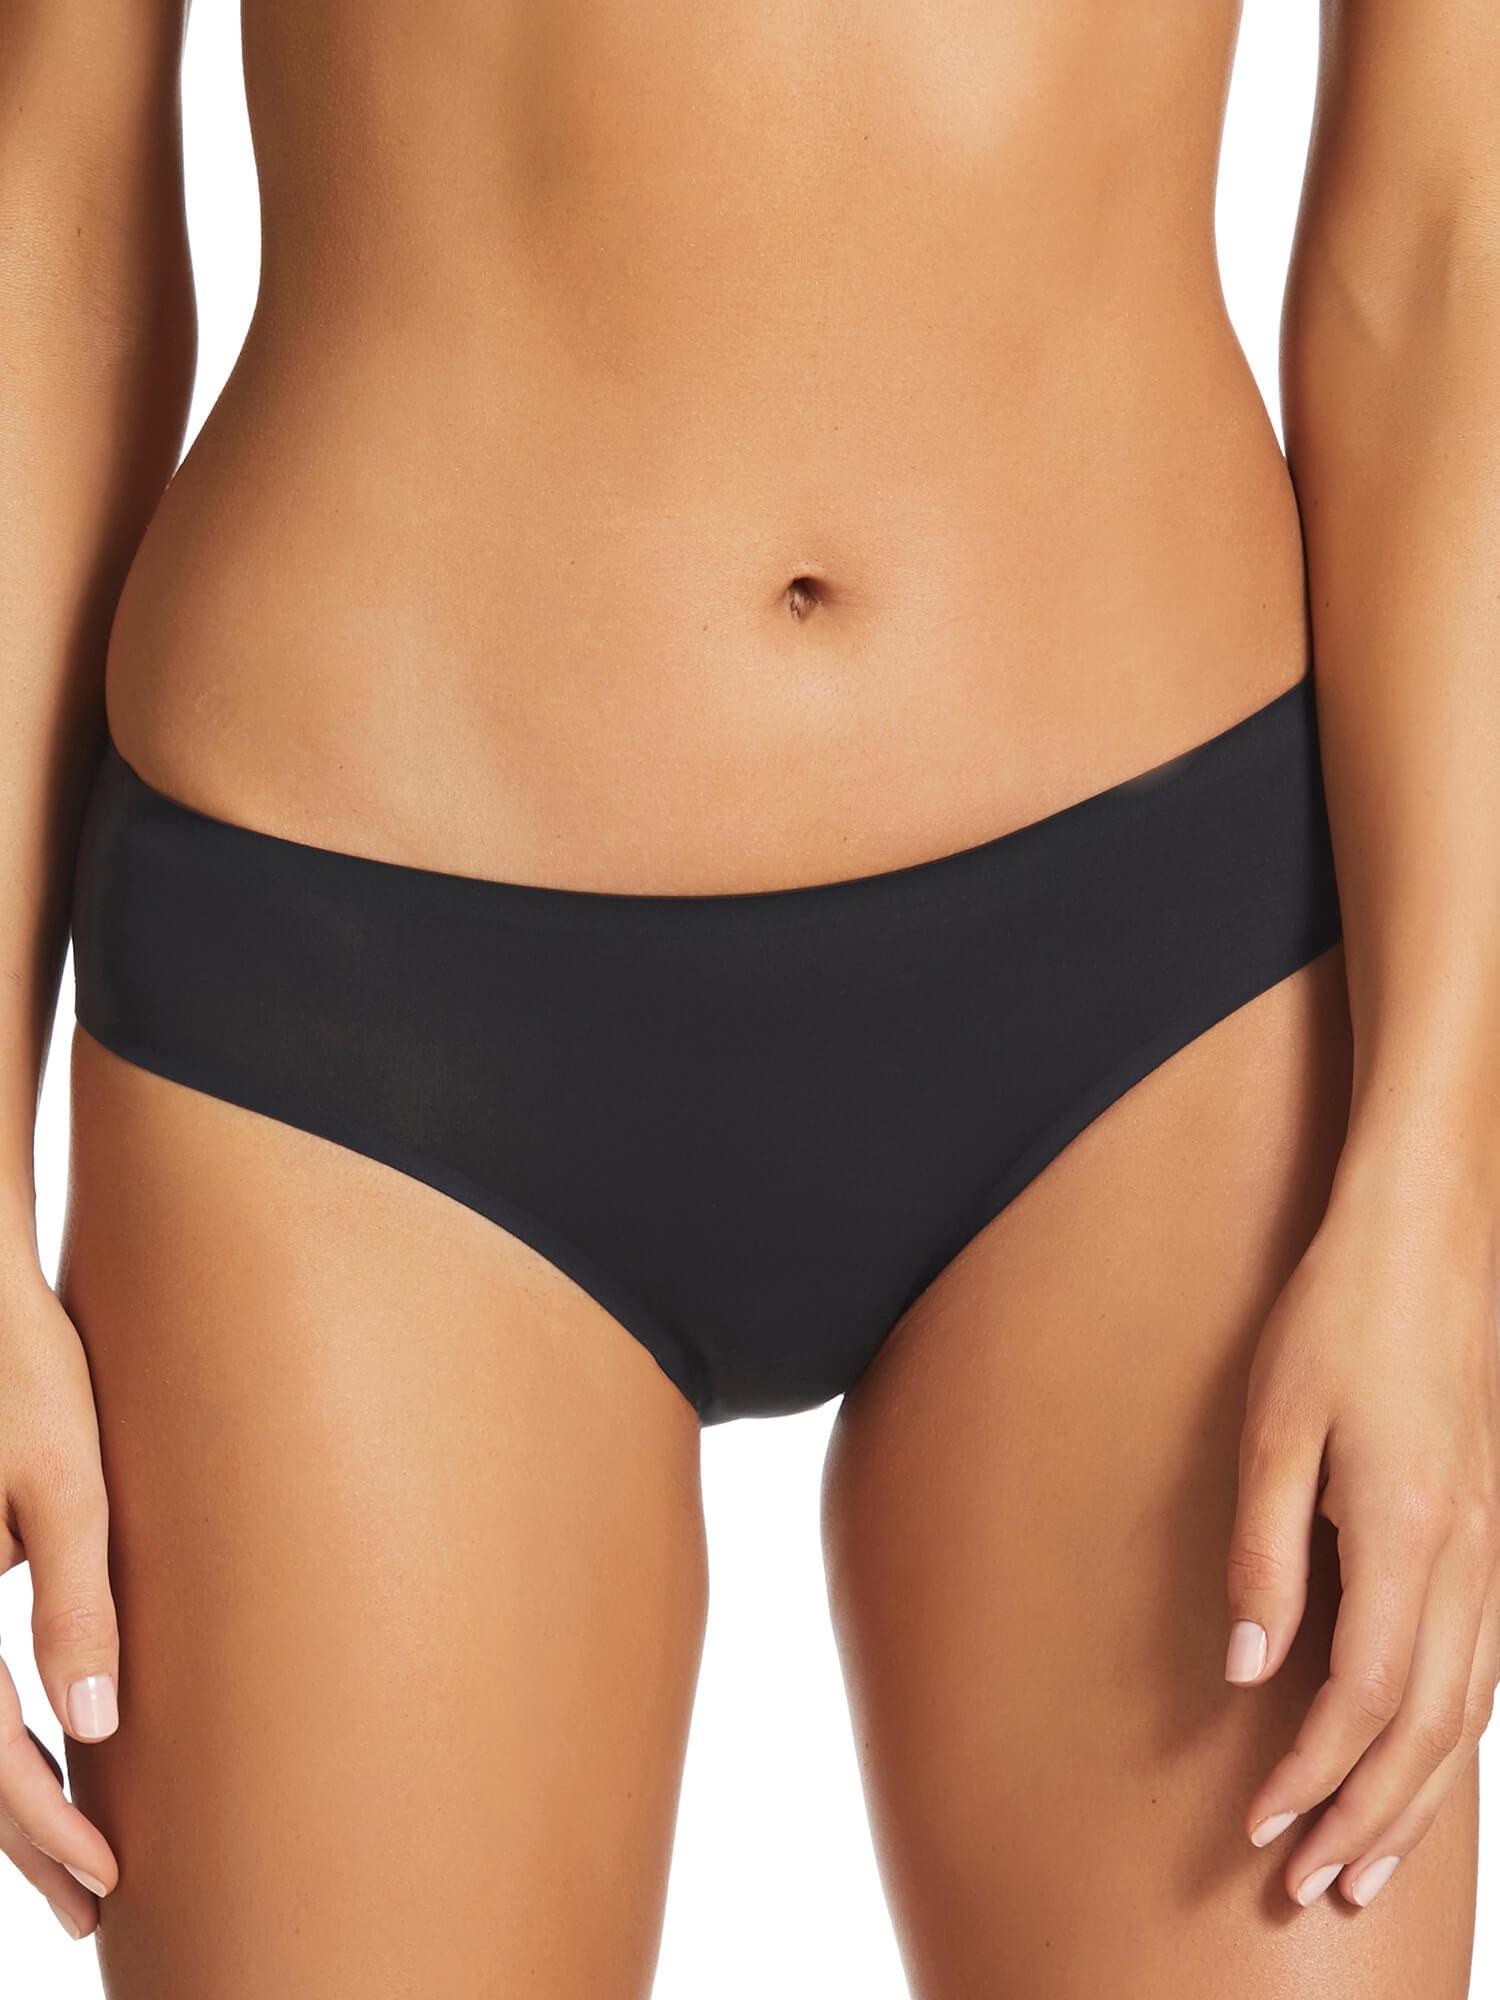 Fine lines Invisibles Bikini IV041 - Briefs Black / One Size  Available at Illusions Lingerie